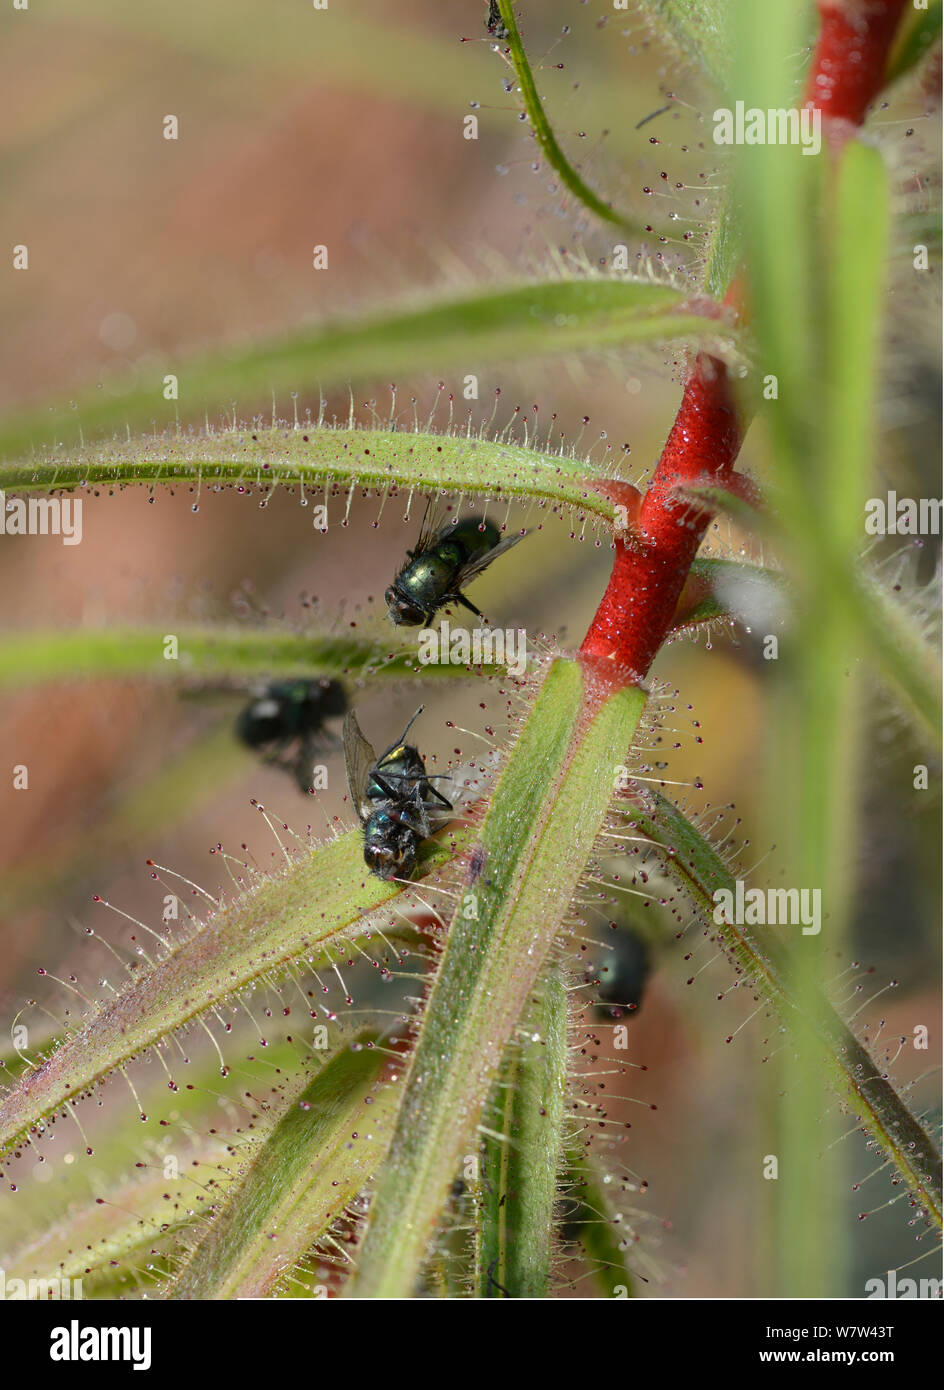 Flycatcher Bush (Roridula gorgonias) with trapped insect, in botanic garden, from South Africa. Stock Photo